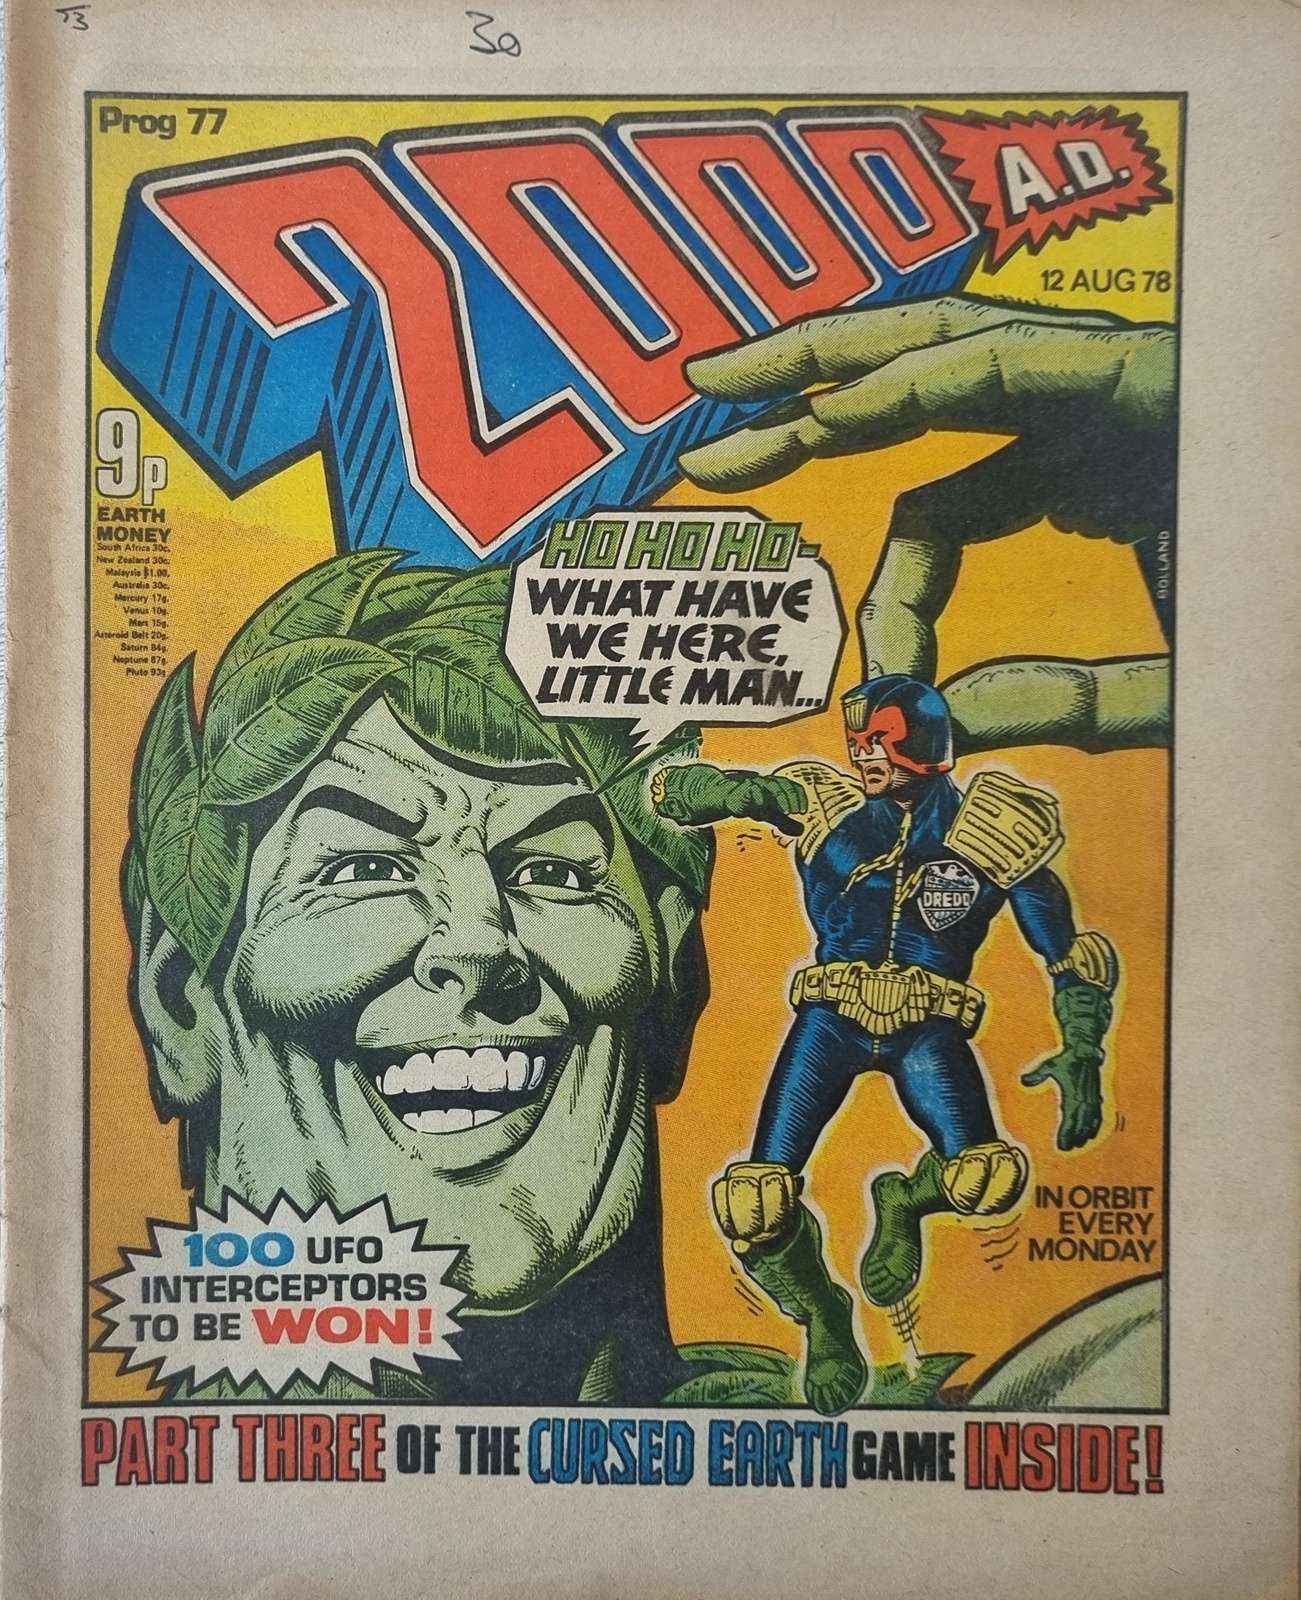 2000 AD Prog #77 (Rare Banned Issue)